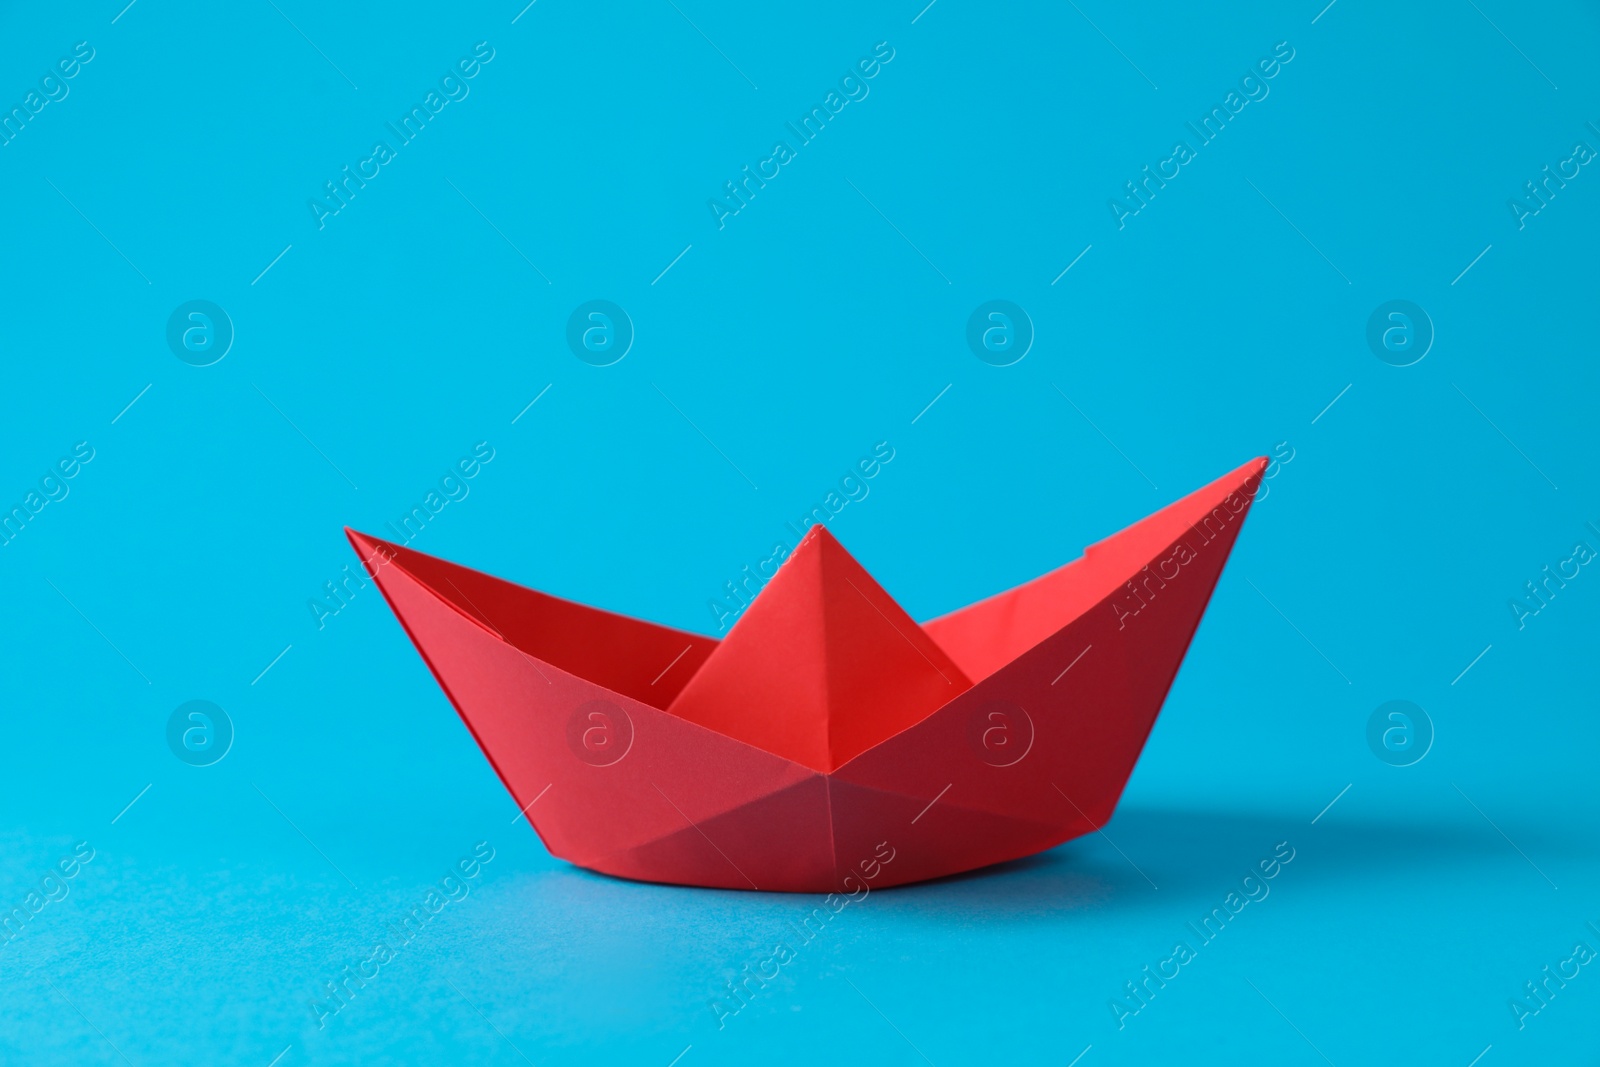 Photo of Handmade red paper boat on light blue background. Origami art